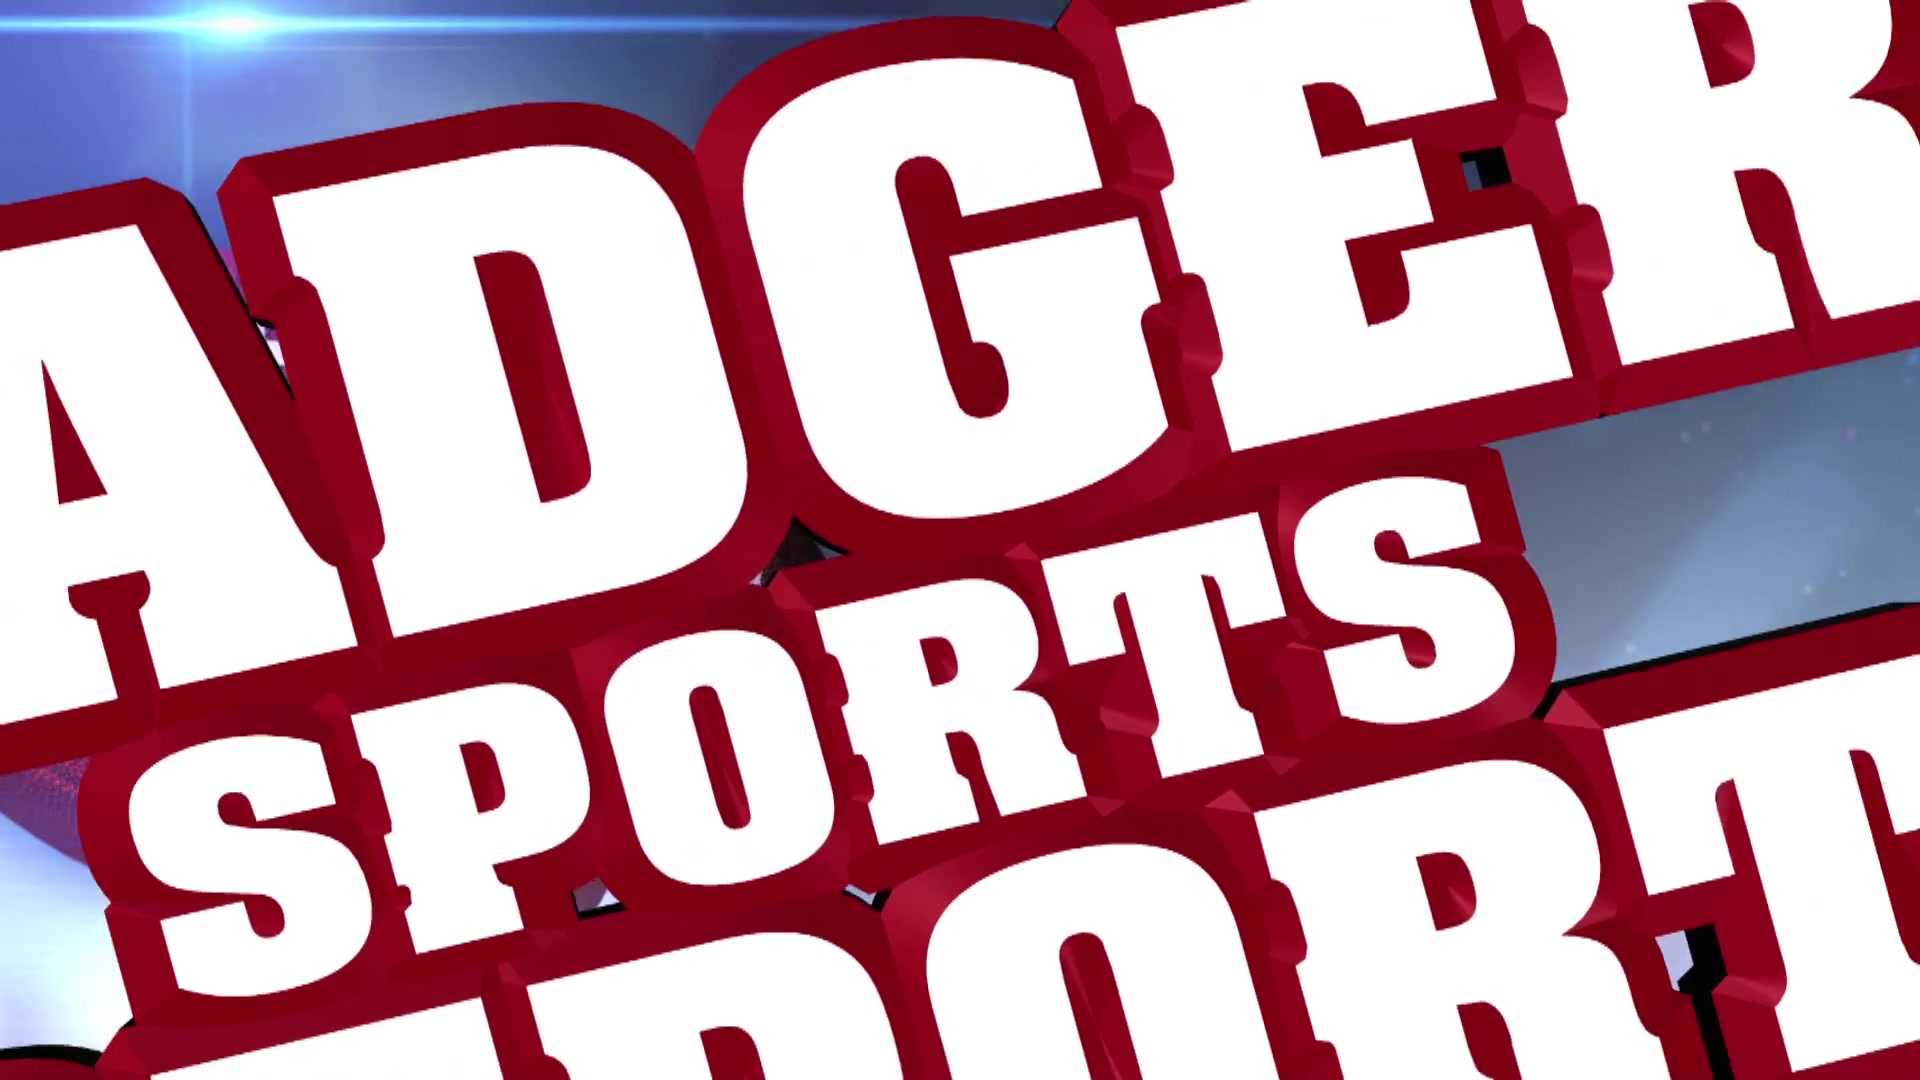 Badger Sports Report Brief 8-17-15